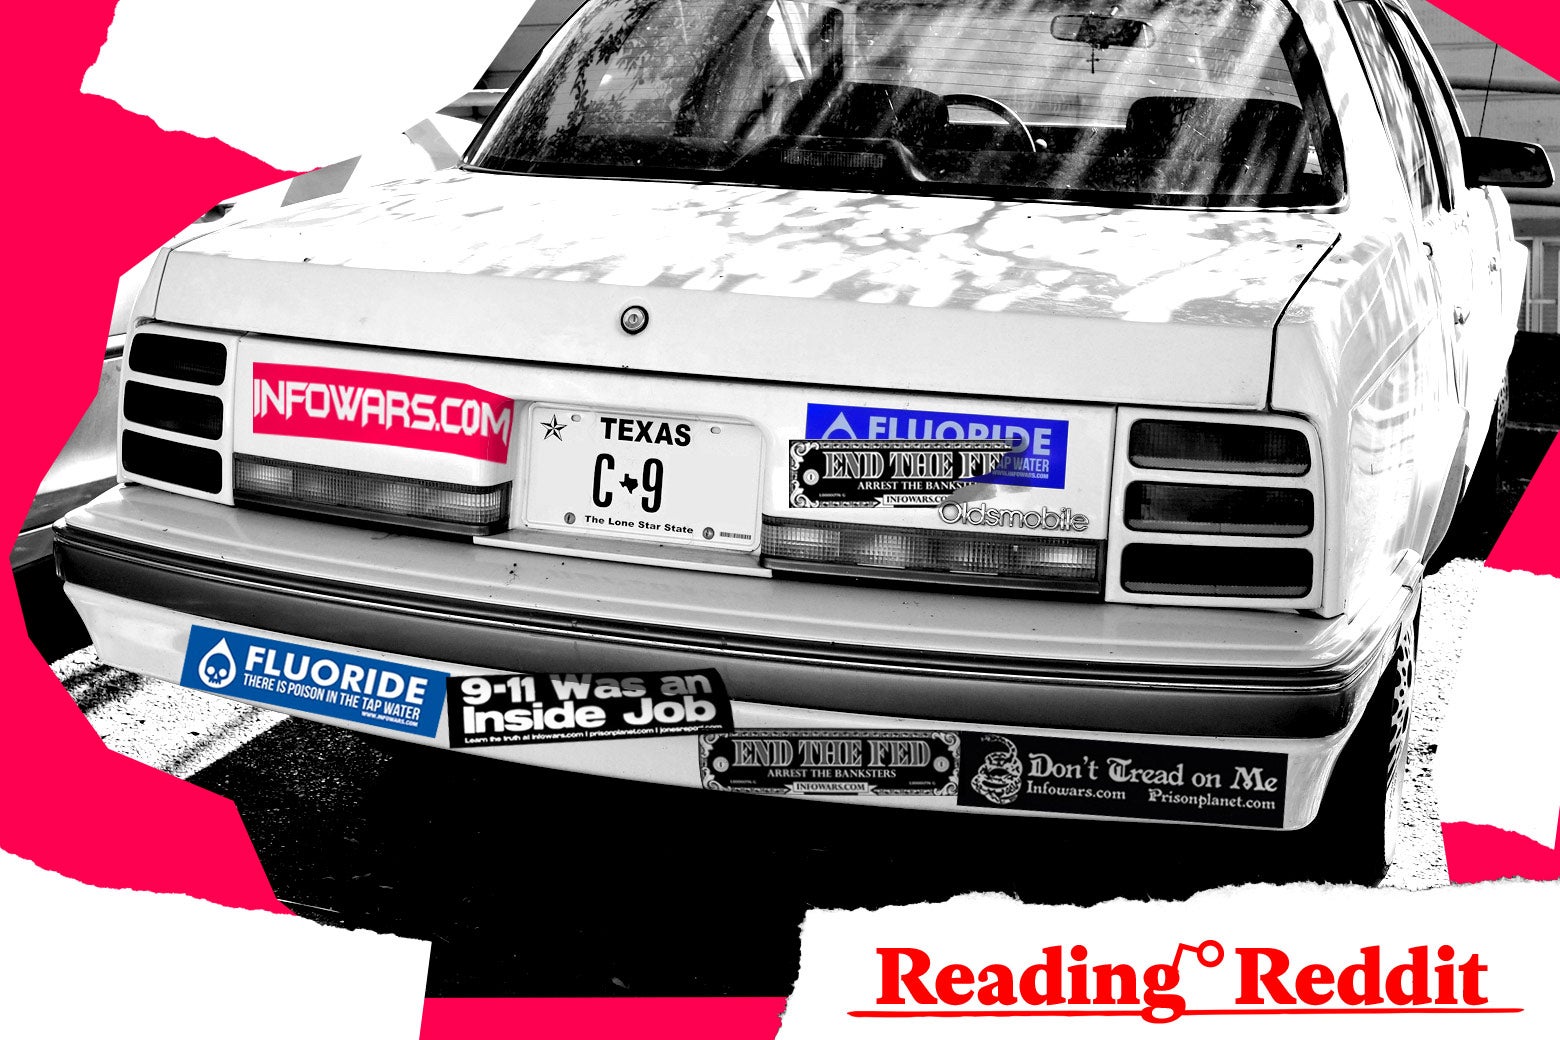 A pro-Infowars car with multiple bumper stickers, including one that says "9/11 was an inside job" and an anti-fluoride sticker ("Fluoride: There is poison in the tap water"), along with the "Reading Reddit" logo superimposed.